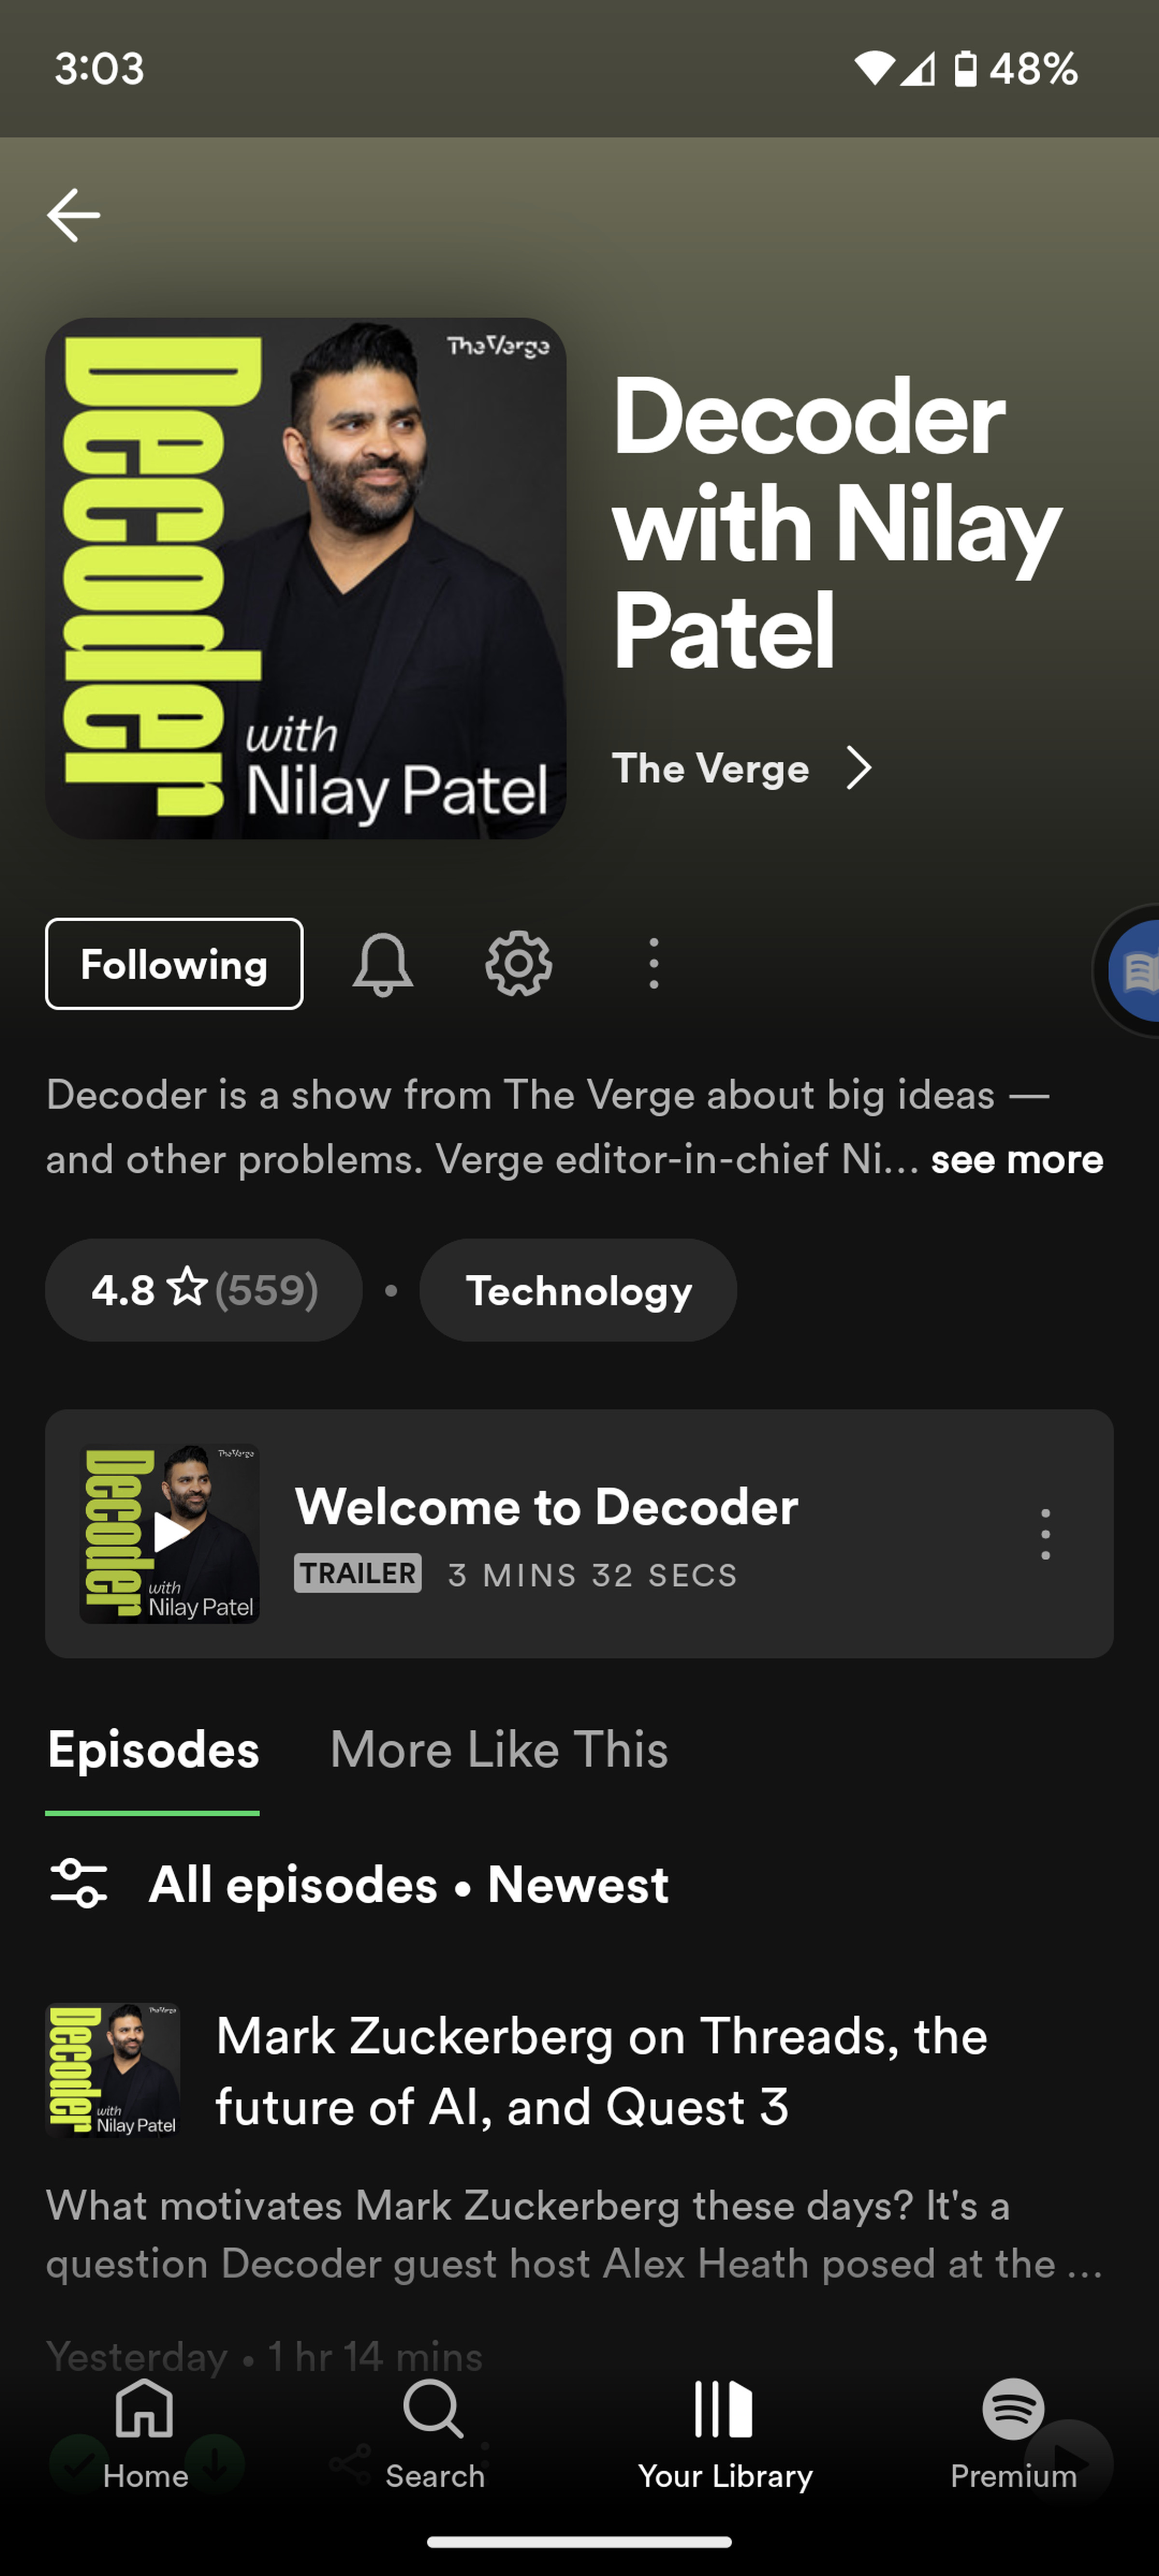 Screen showing cover and words Decoder with Nilay Patel, with the beginning of a description under that, a “Welcome to Decoder” buton under that, and the first of a list of episodes under that.